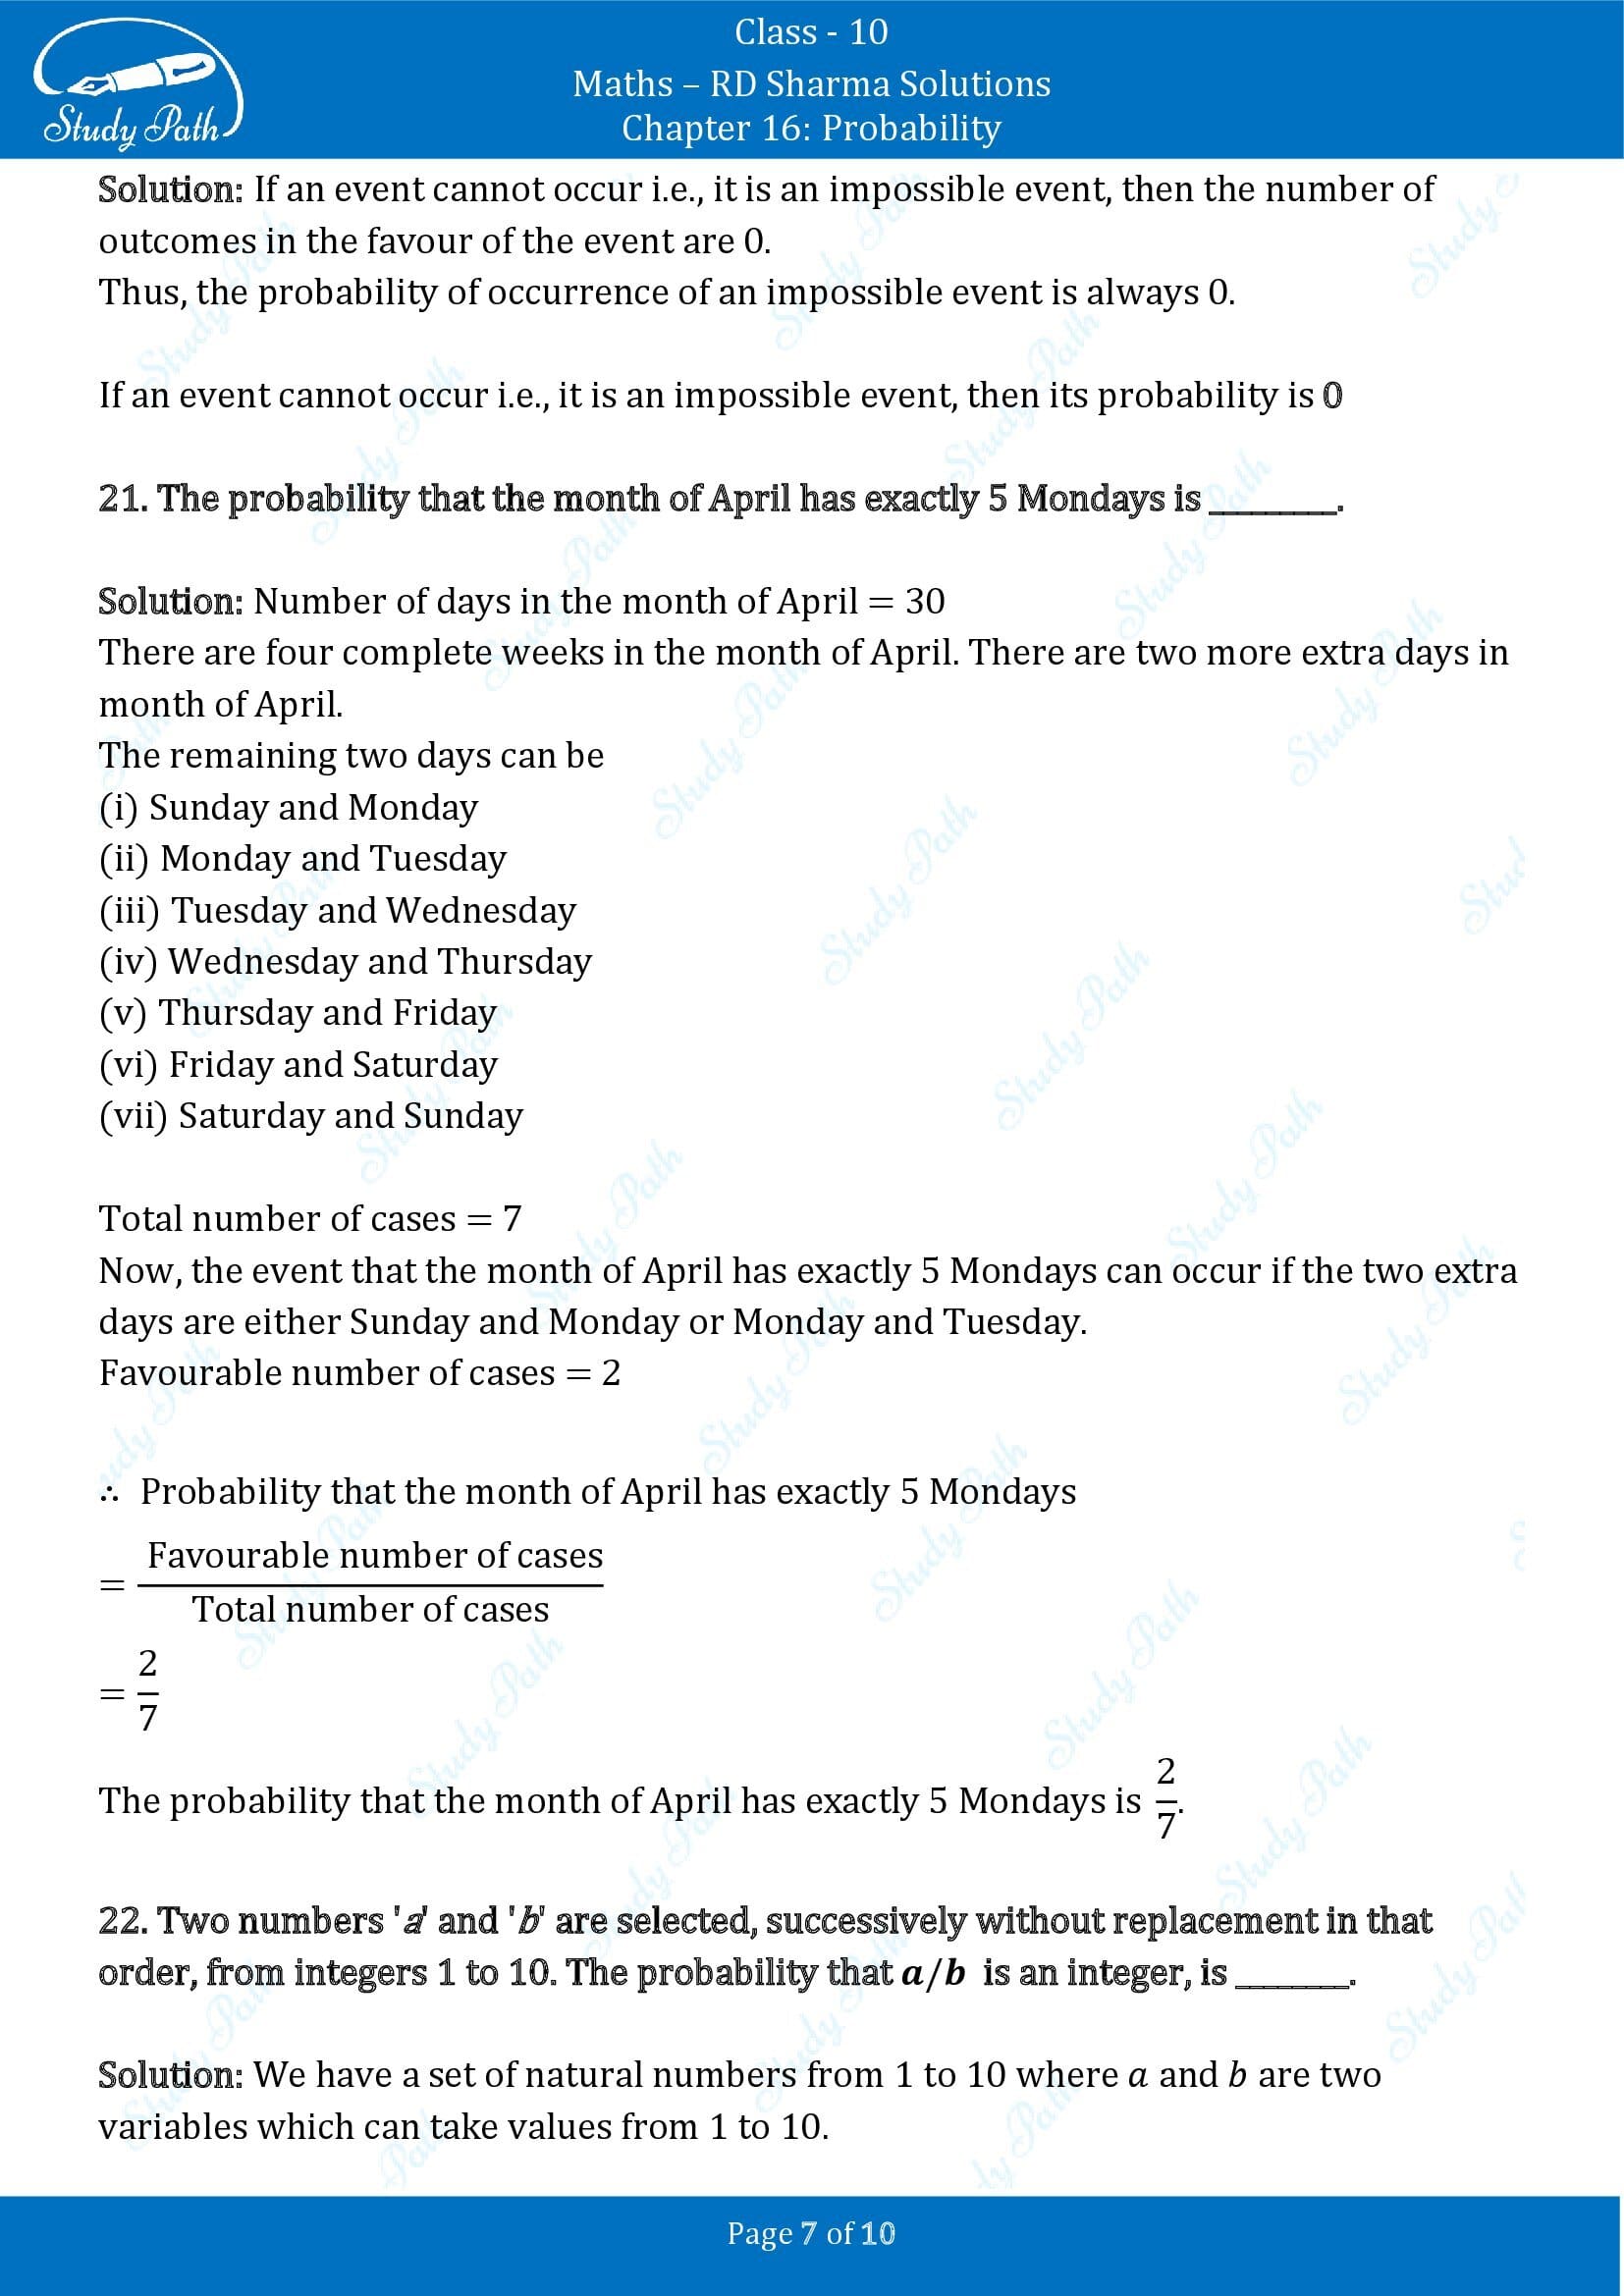 RD Sharma Solutions Class 10 Chapter 16 Probability Fill in the Blank Type Questions FBQs 00007